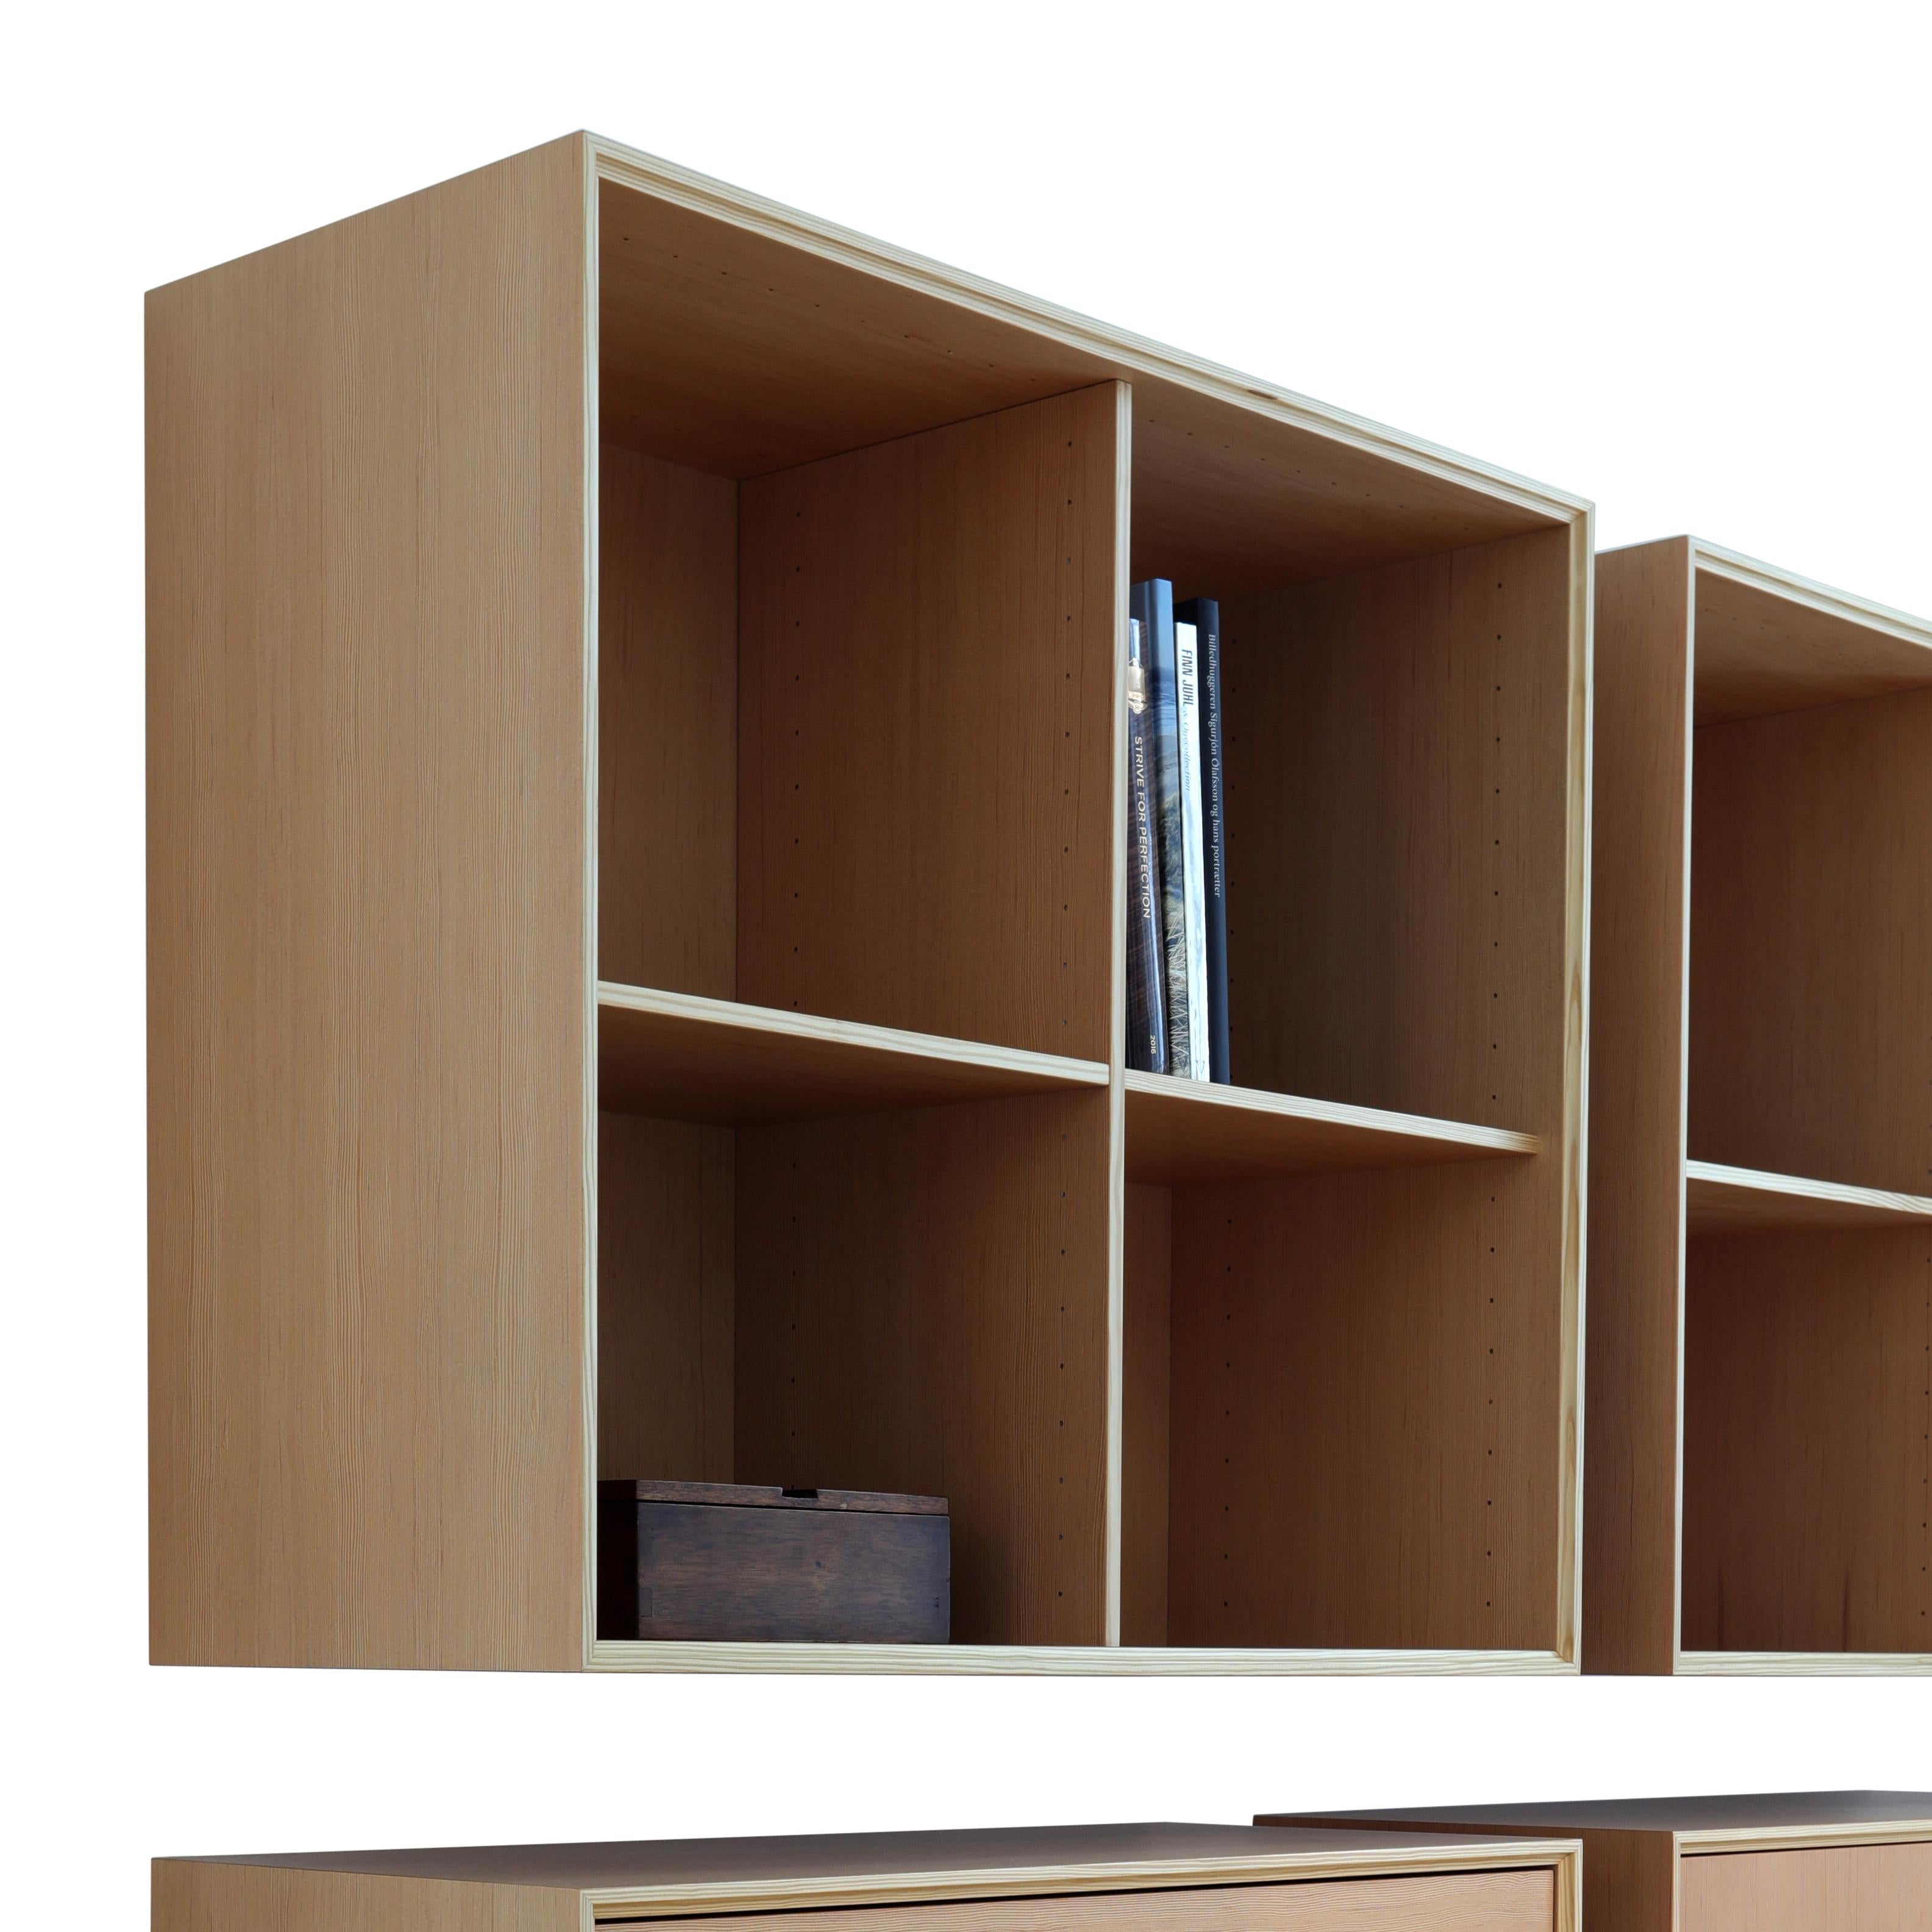 The Classic bookcase was designed by Henrik Tengler in 2017 and is an exclusive system with endless possibilities. The system offers elegant and flexible storage solutions for the private home or the office. Choose your preferred look by selecting